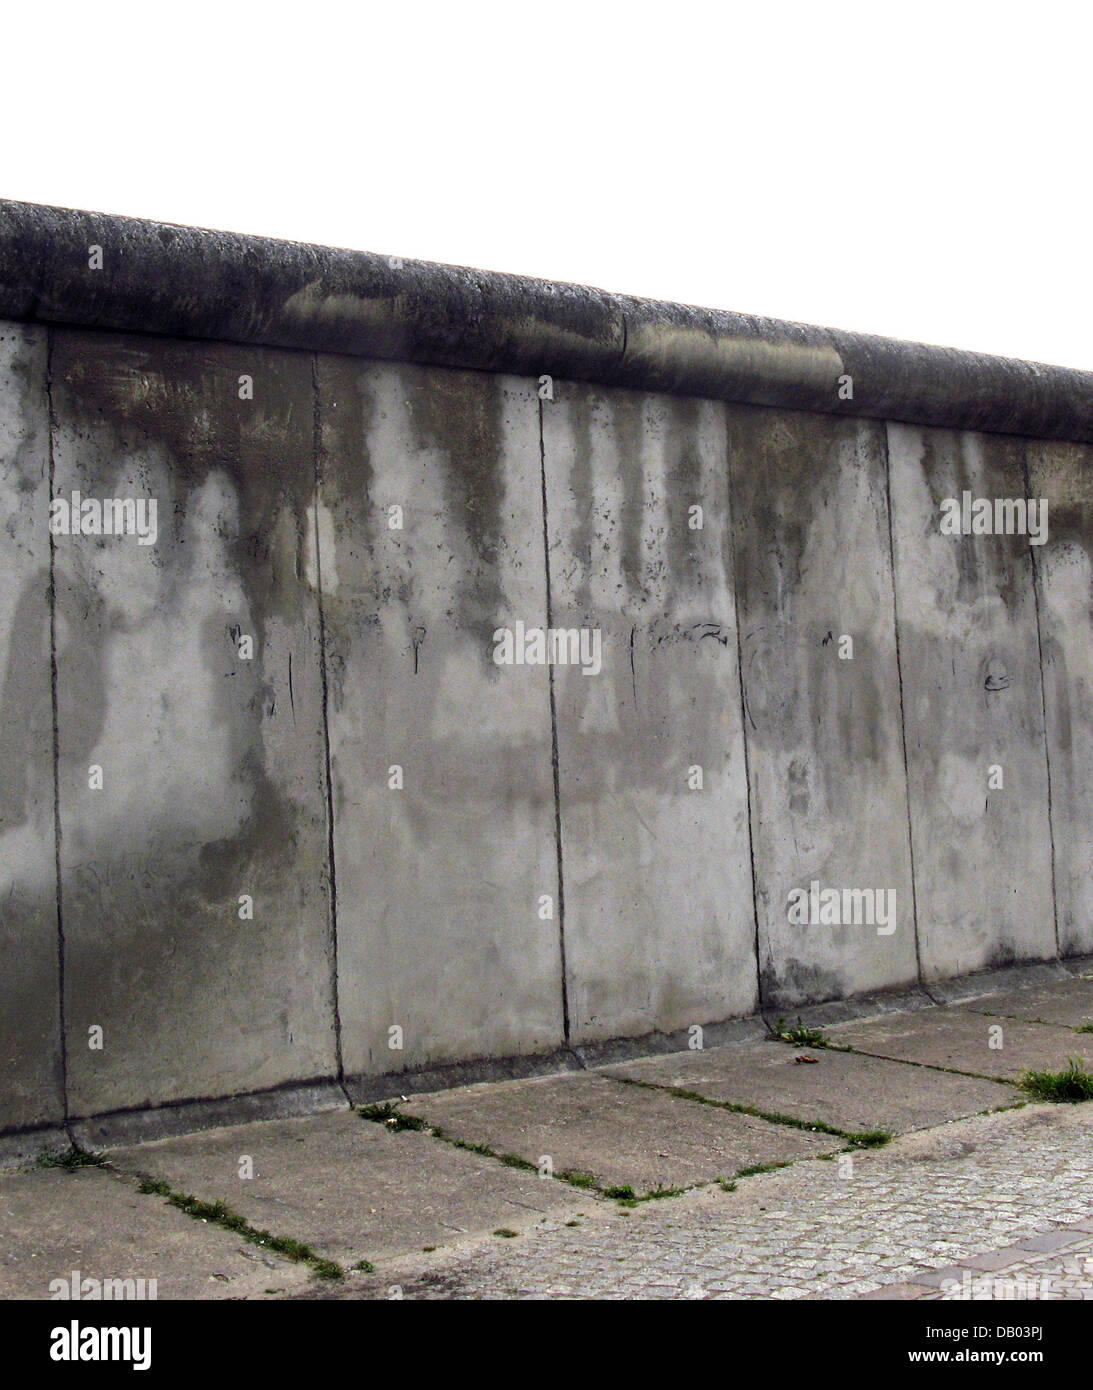 The picture shows a part of the Berlin Wall at the Bernauer Street in Berlin, Germany, 9 June 2007. The wall is part of a centre for historical documentation which was opened at the 10th aniversary of the fall of the Berlin Wall in November 1999 with the exhibition 'Boarderview'. The centre functions as a place for historical research and presentation of a devided Germany. Photo: P Stock Photo